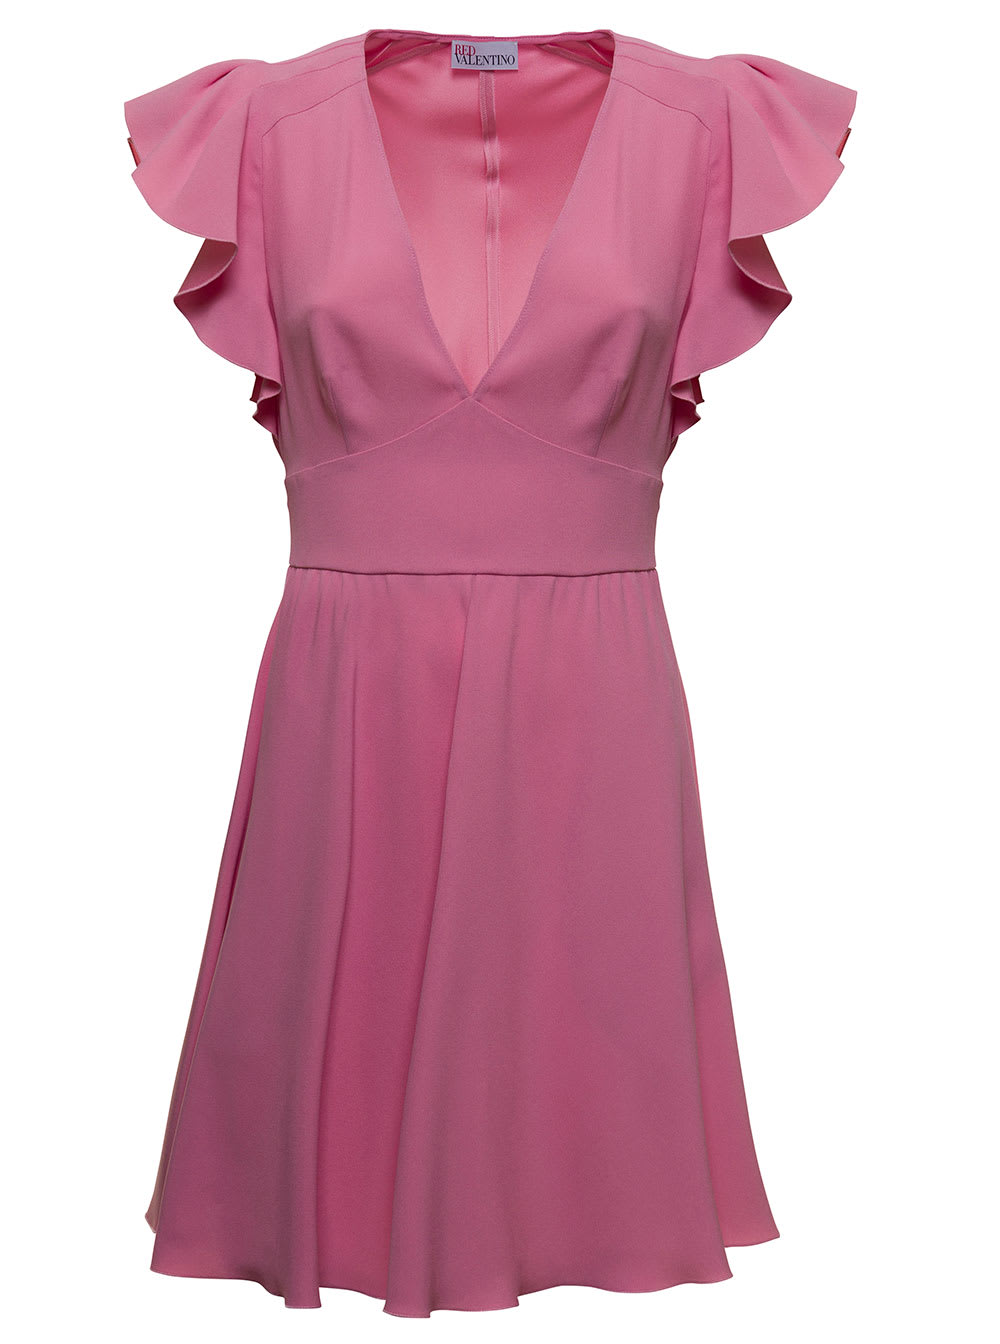 RED Valentino Pink Viscose Blend Dress With Ruffles And Bow